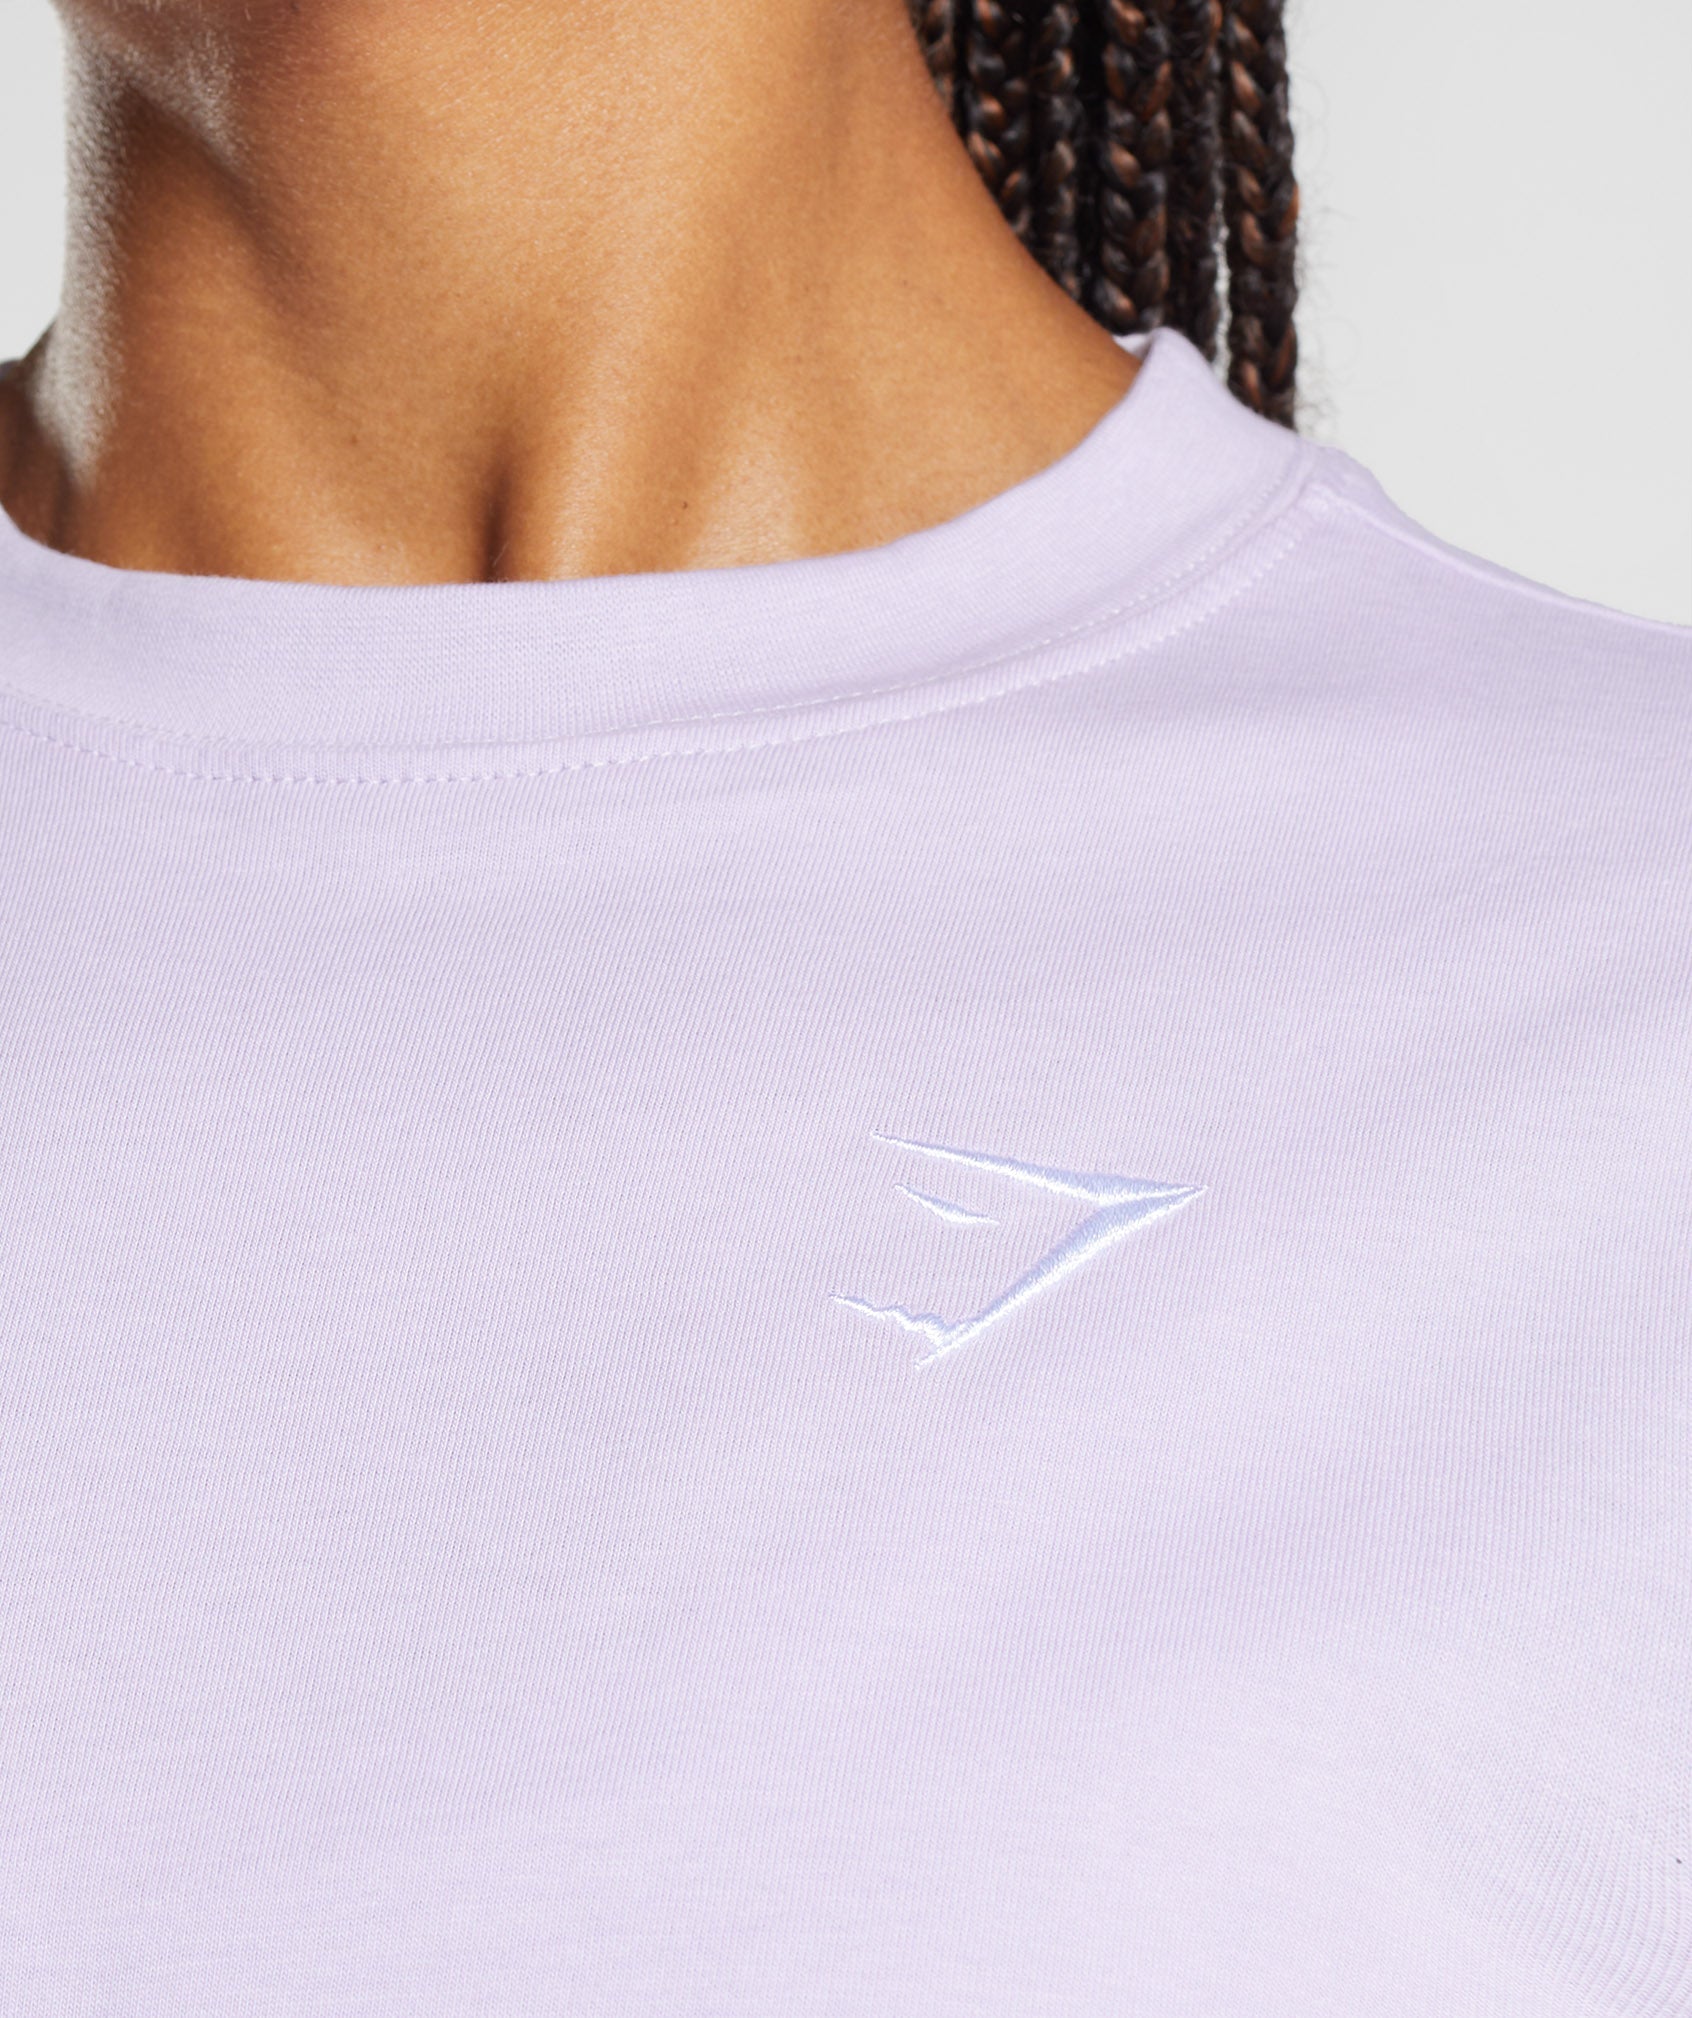 Training Oversized T-shirt in Soft Lilac